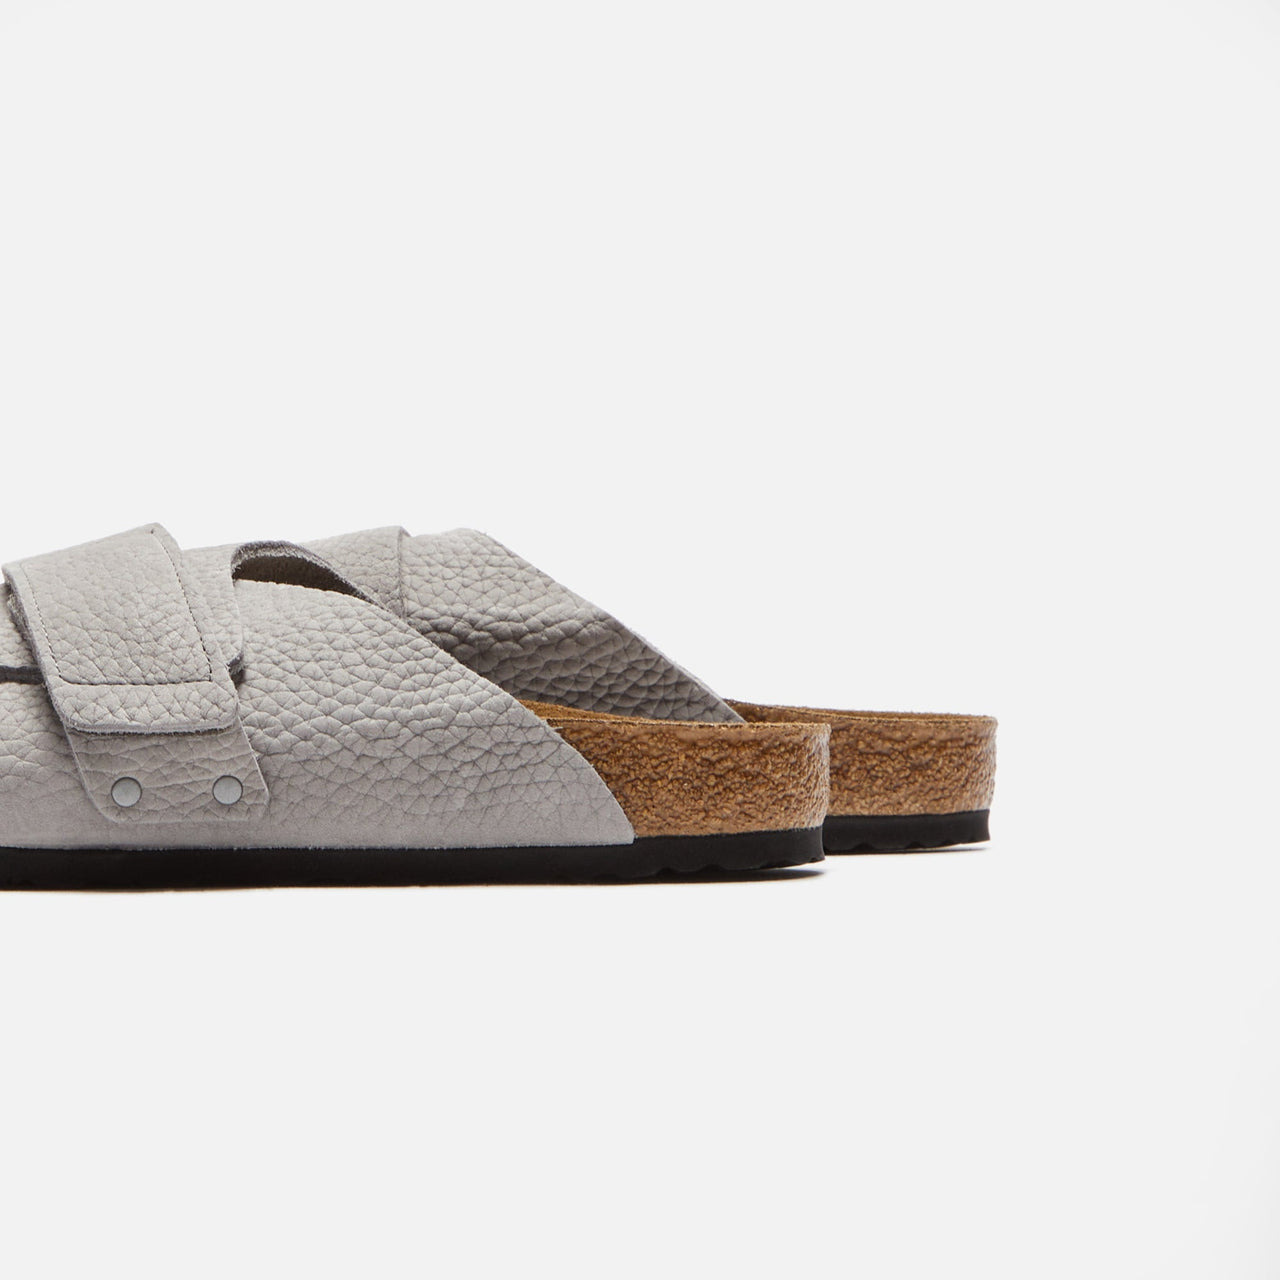 Side view of the Birkenstock Kyoto Nubuck Whale Grey sandal with adjustable buckle strap